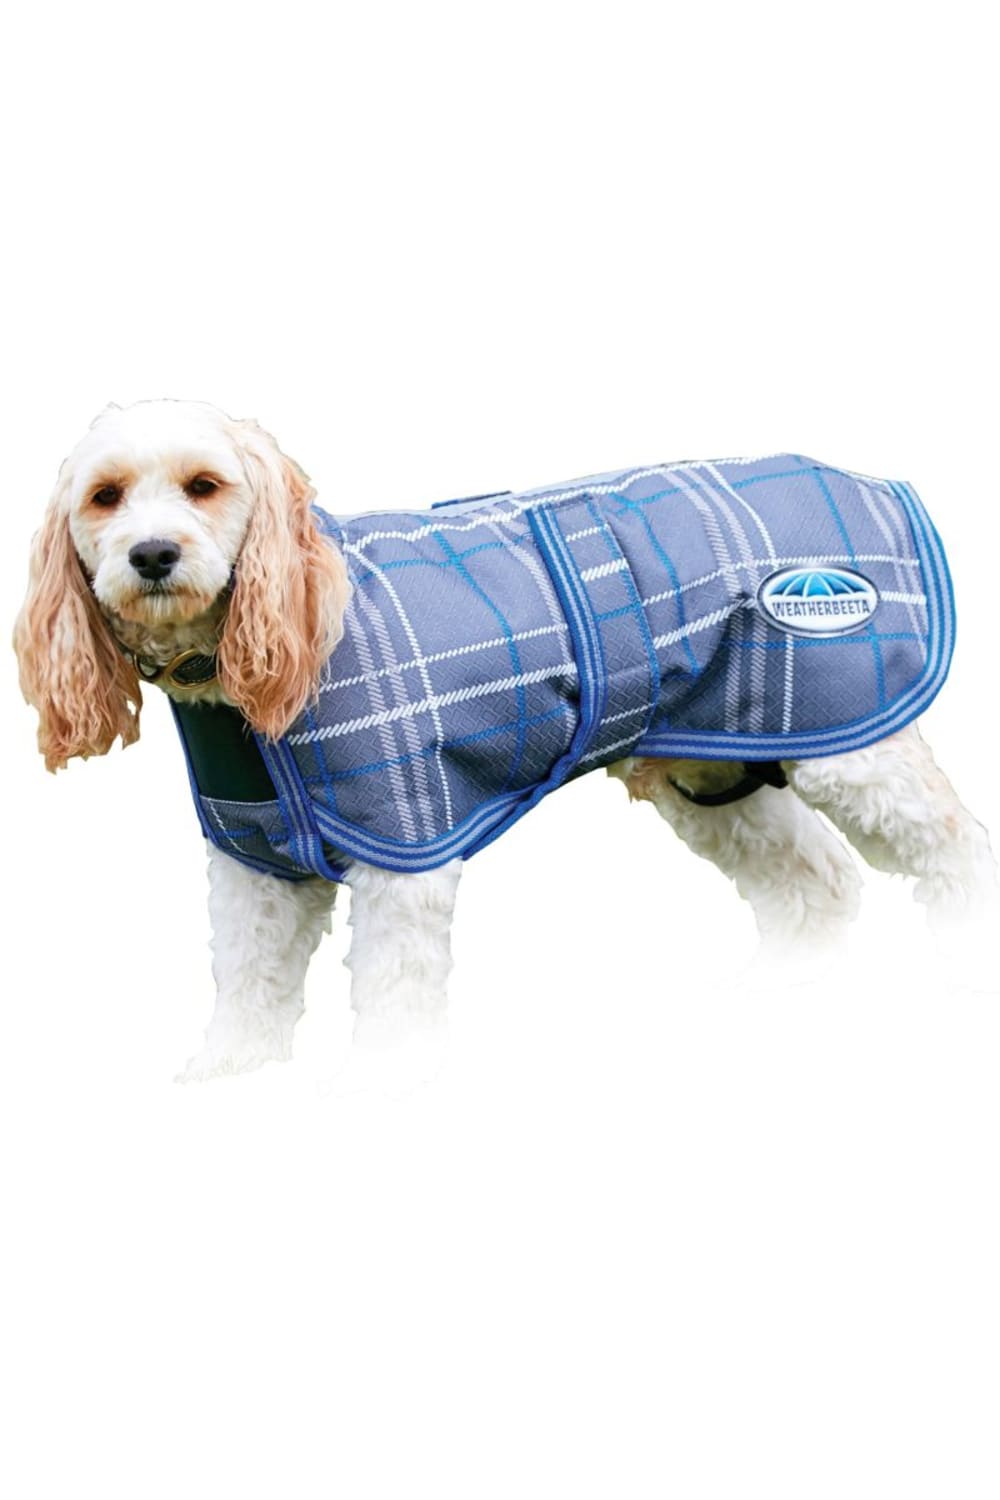 Weatherbeeta Parka 1200d Deluxe Dog Coat (Gray Plaid) (27.6 inches) (27.6 inches)